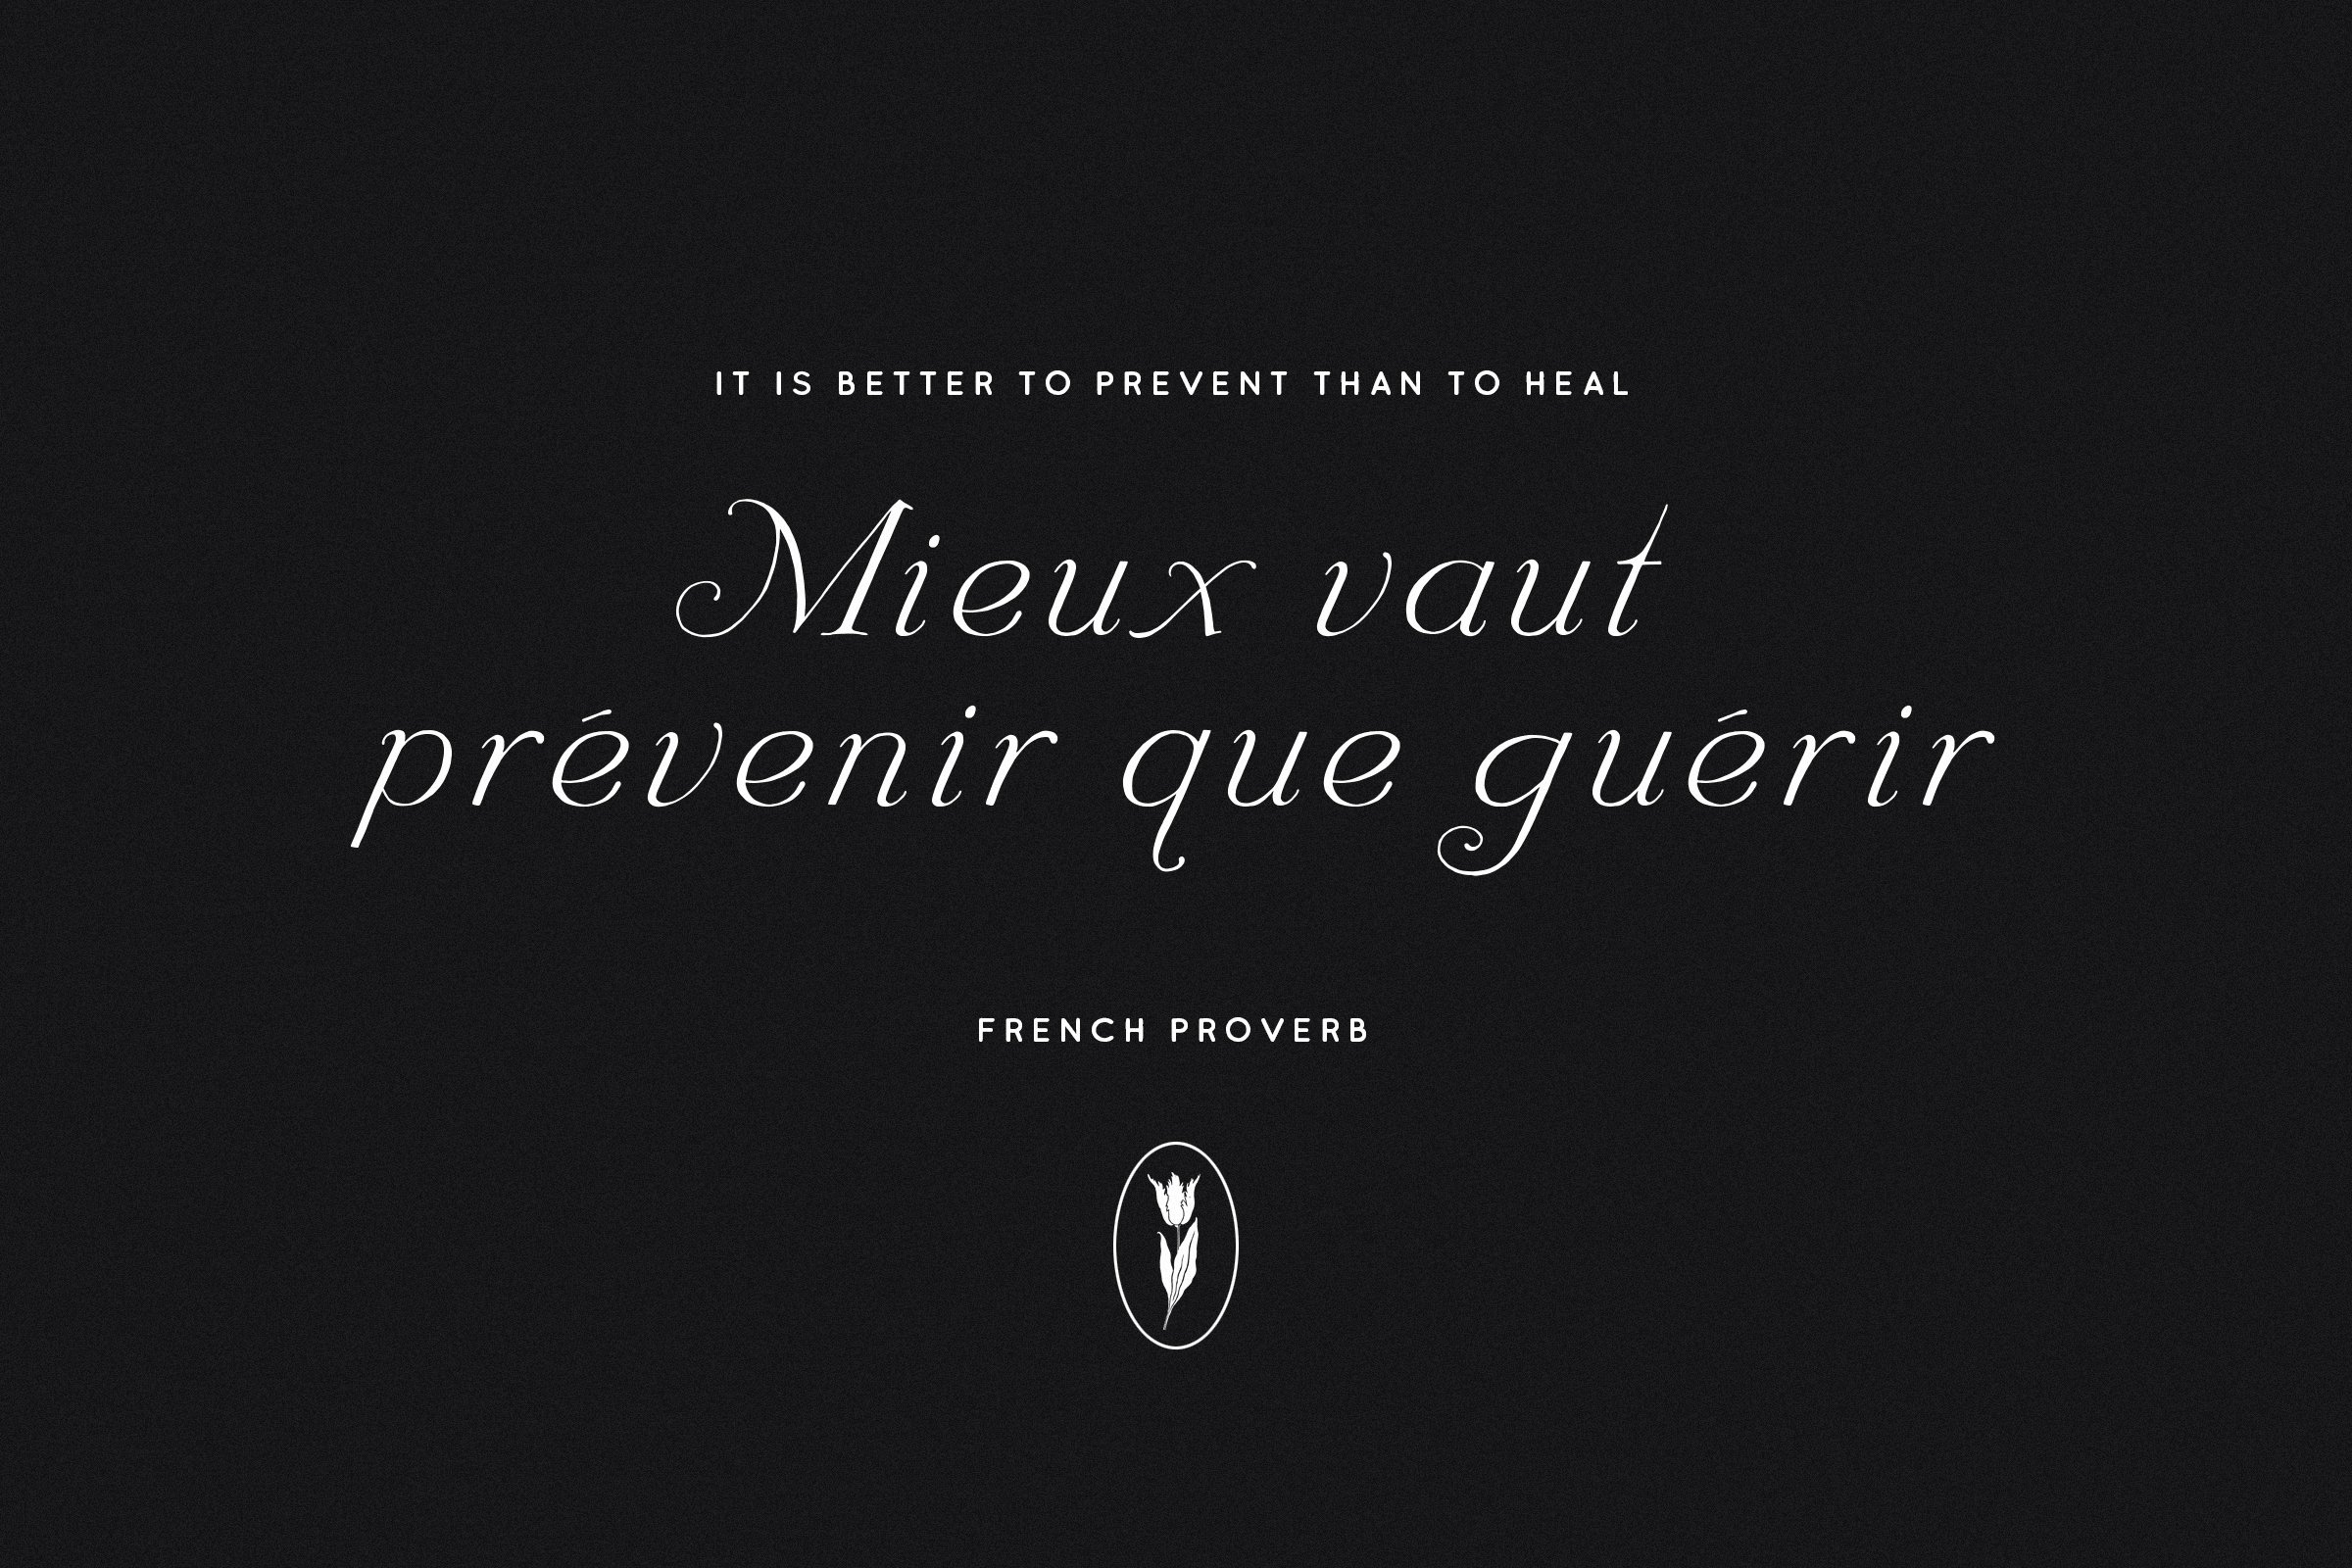 french proverb 8 669